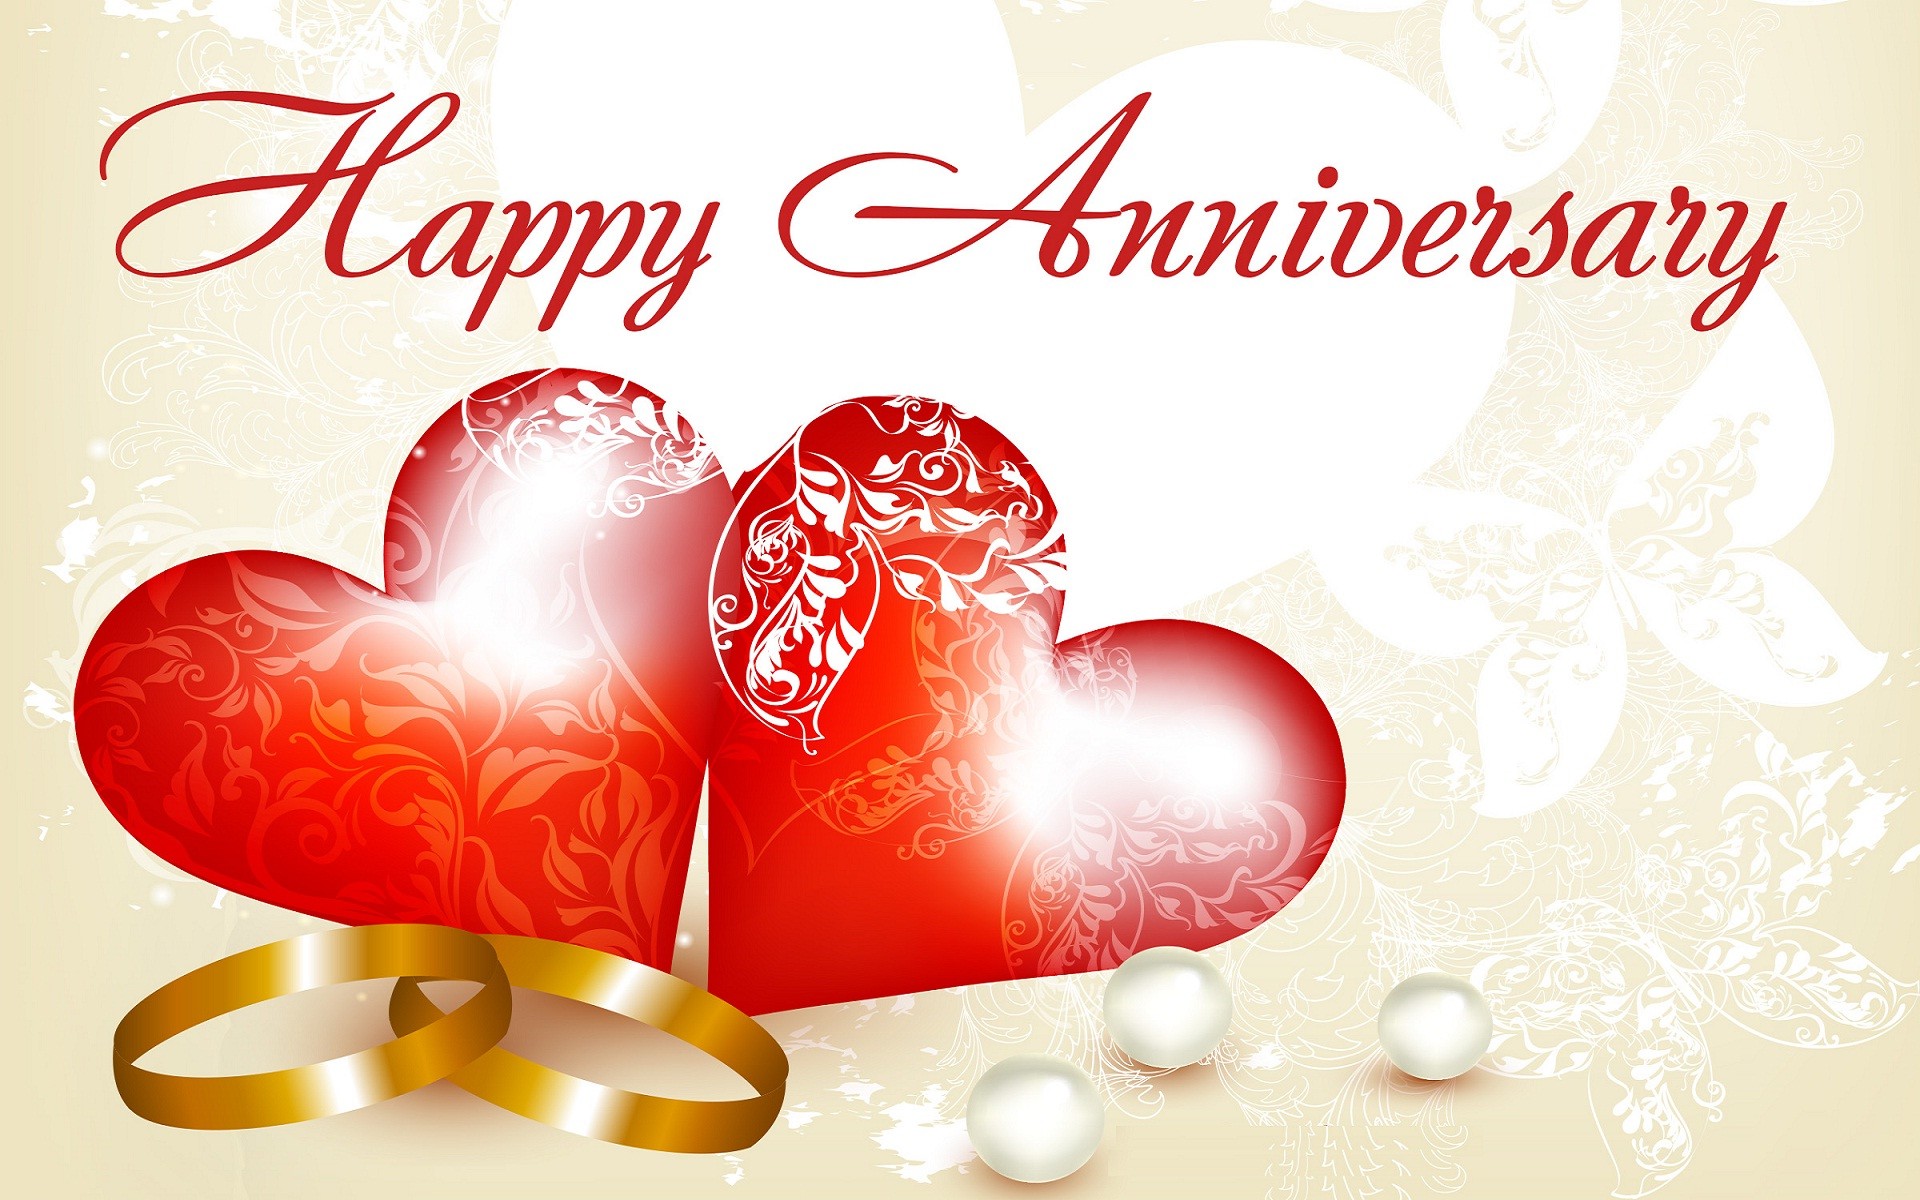 1920x1200 Happy wedding anniversary rings wide hd wallpapers | Wallpapers .